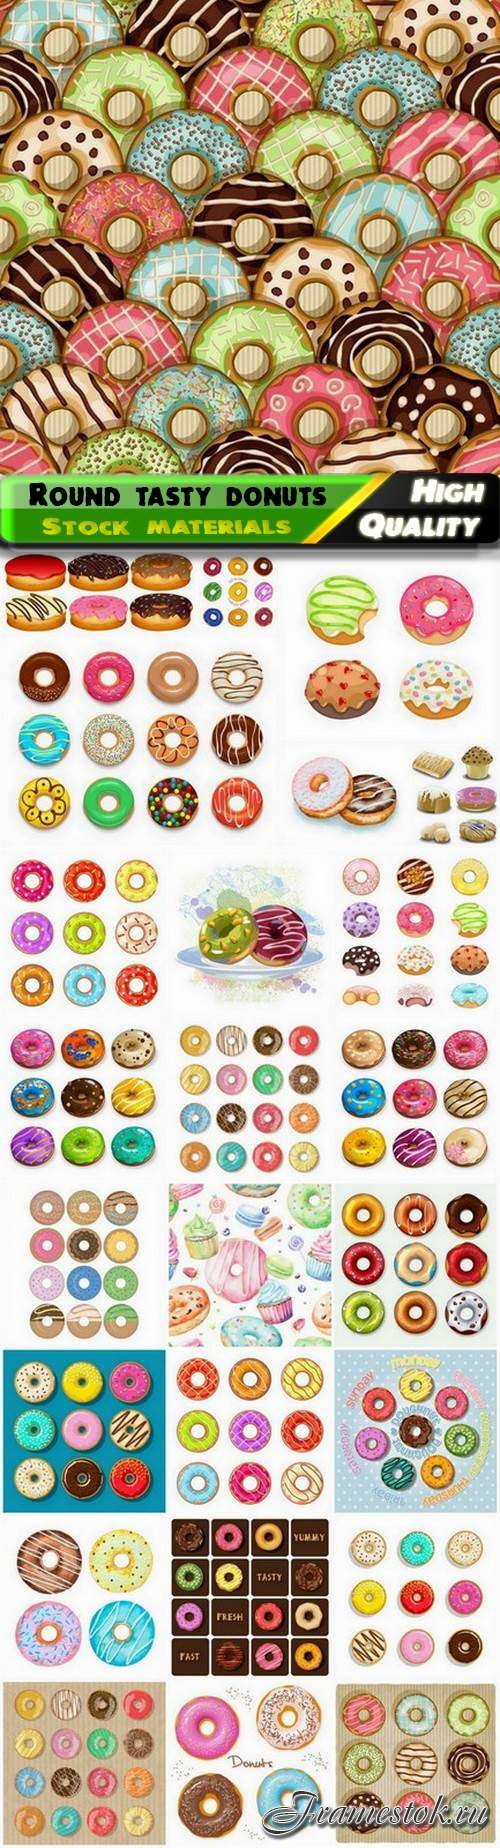 Round tasty bakery products donuts is sweet dessert in glaze - 25 Eps